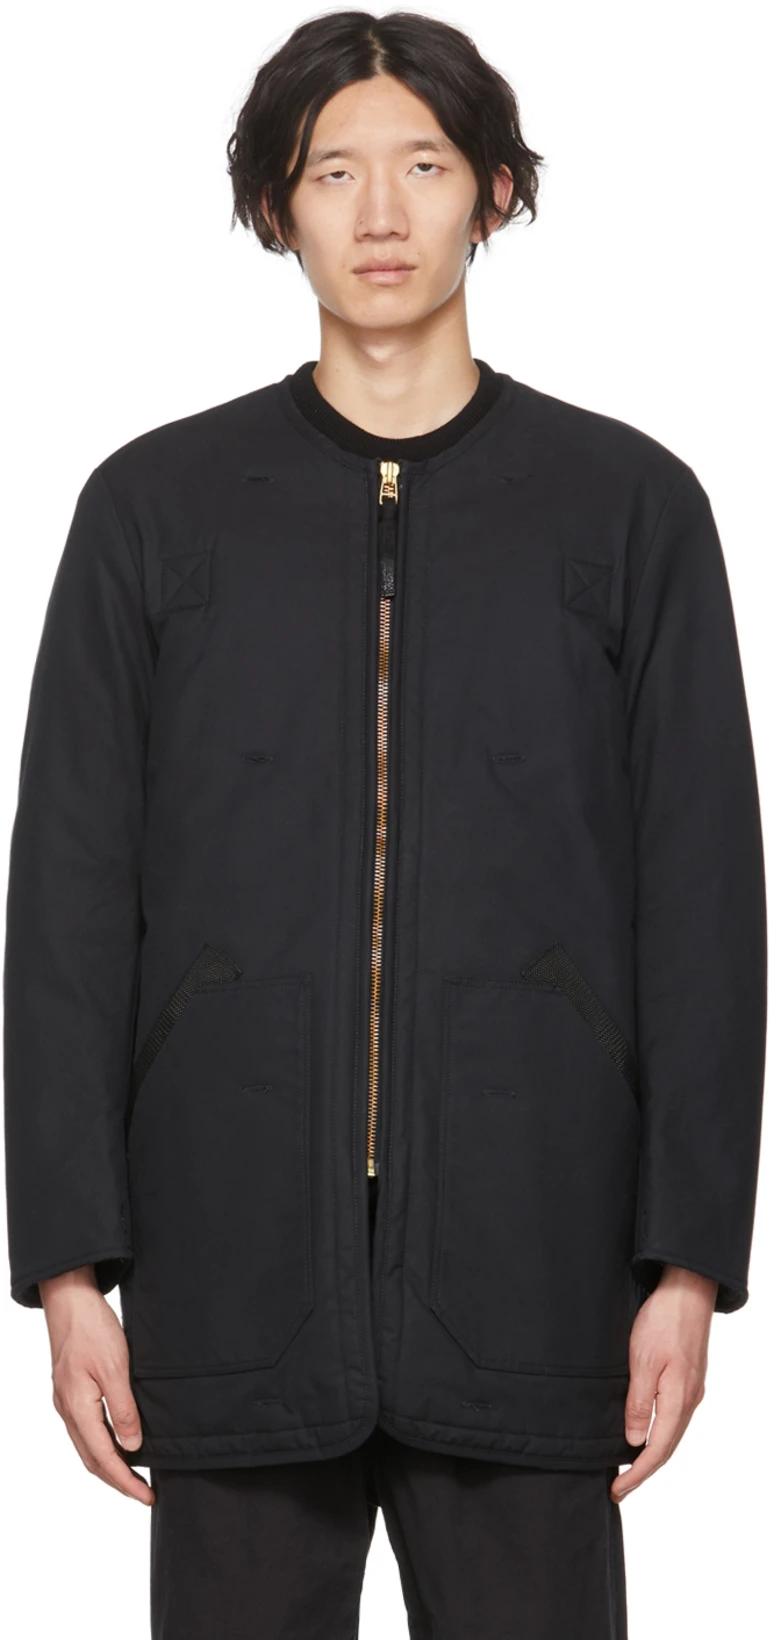 Black AM2-1B Liner Jacket by APPLIED ART FORMS